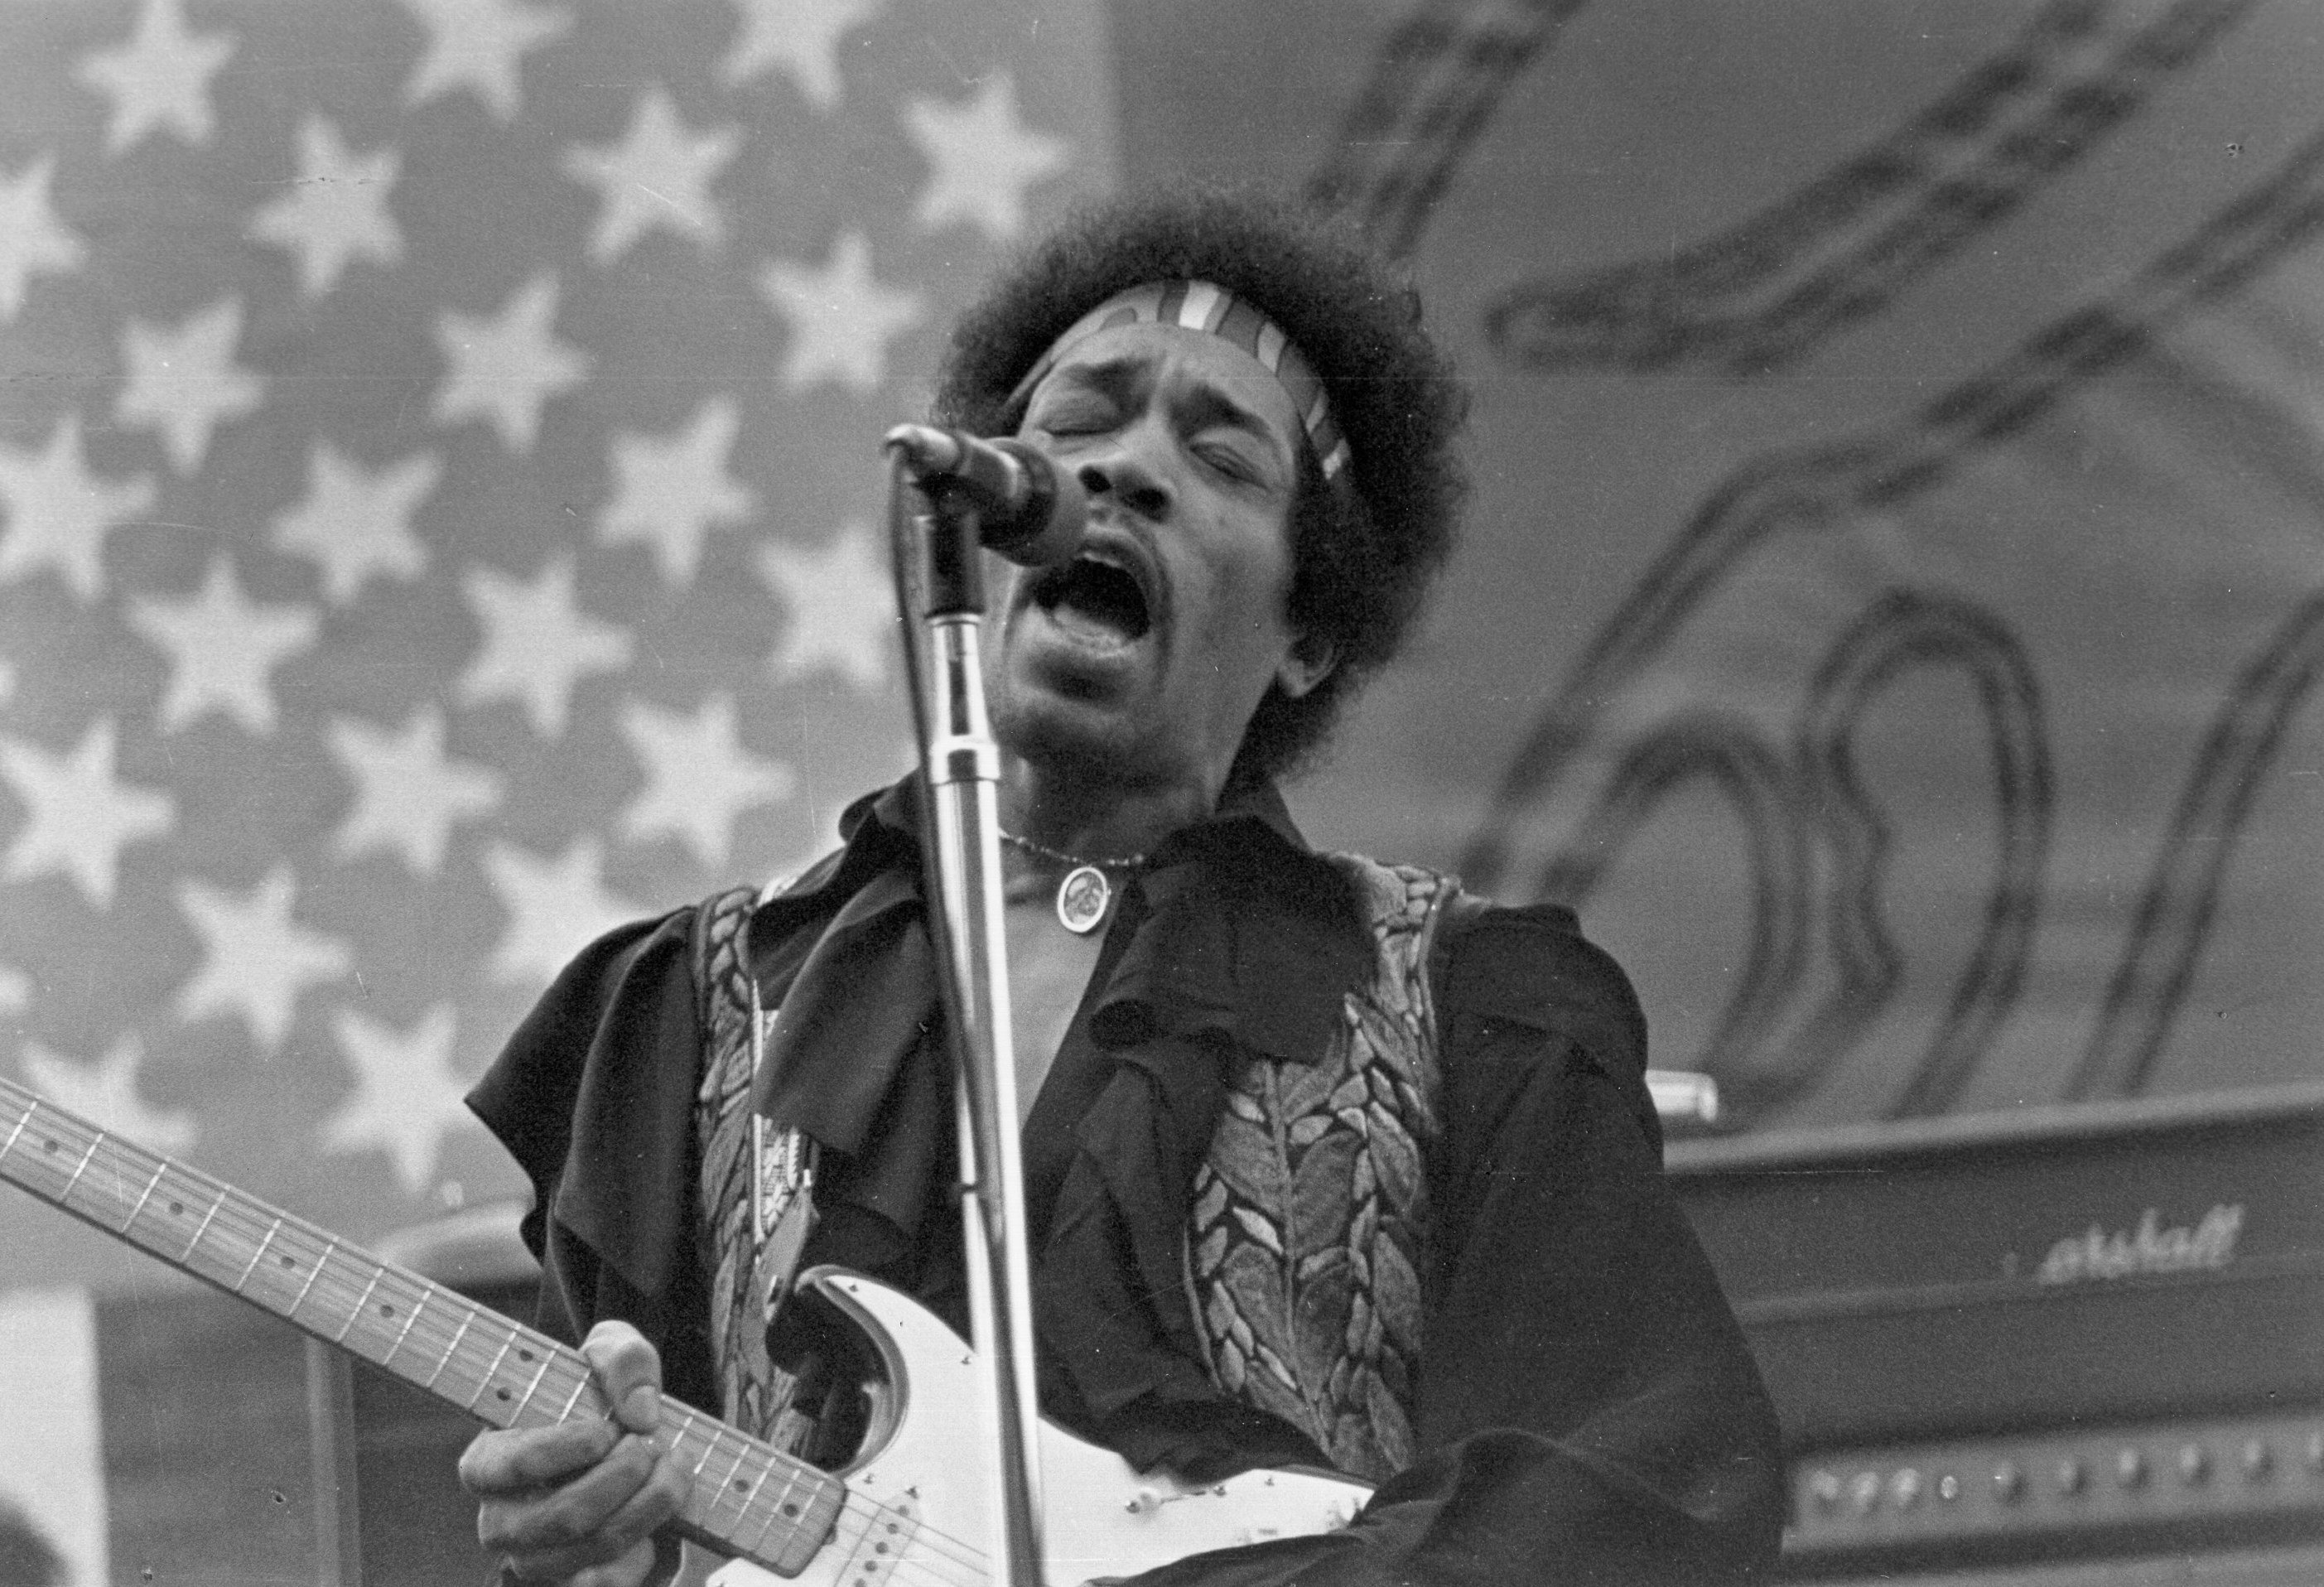 The U.S. Army Concluded Jimi Hendrix Couldn’t ‘Function While Performing Duties and Thinking About His Guitar’